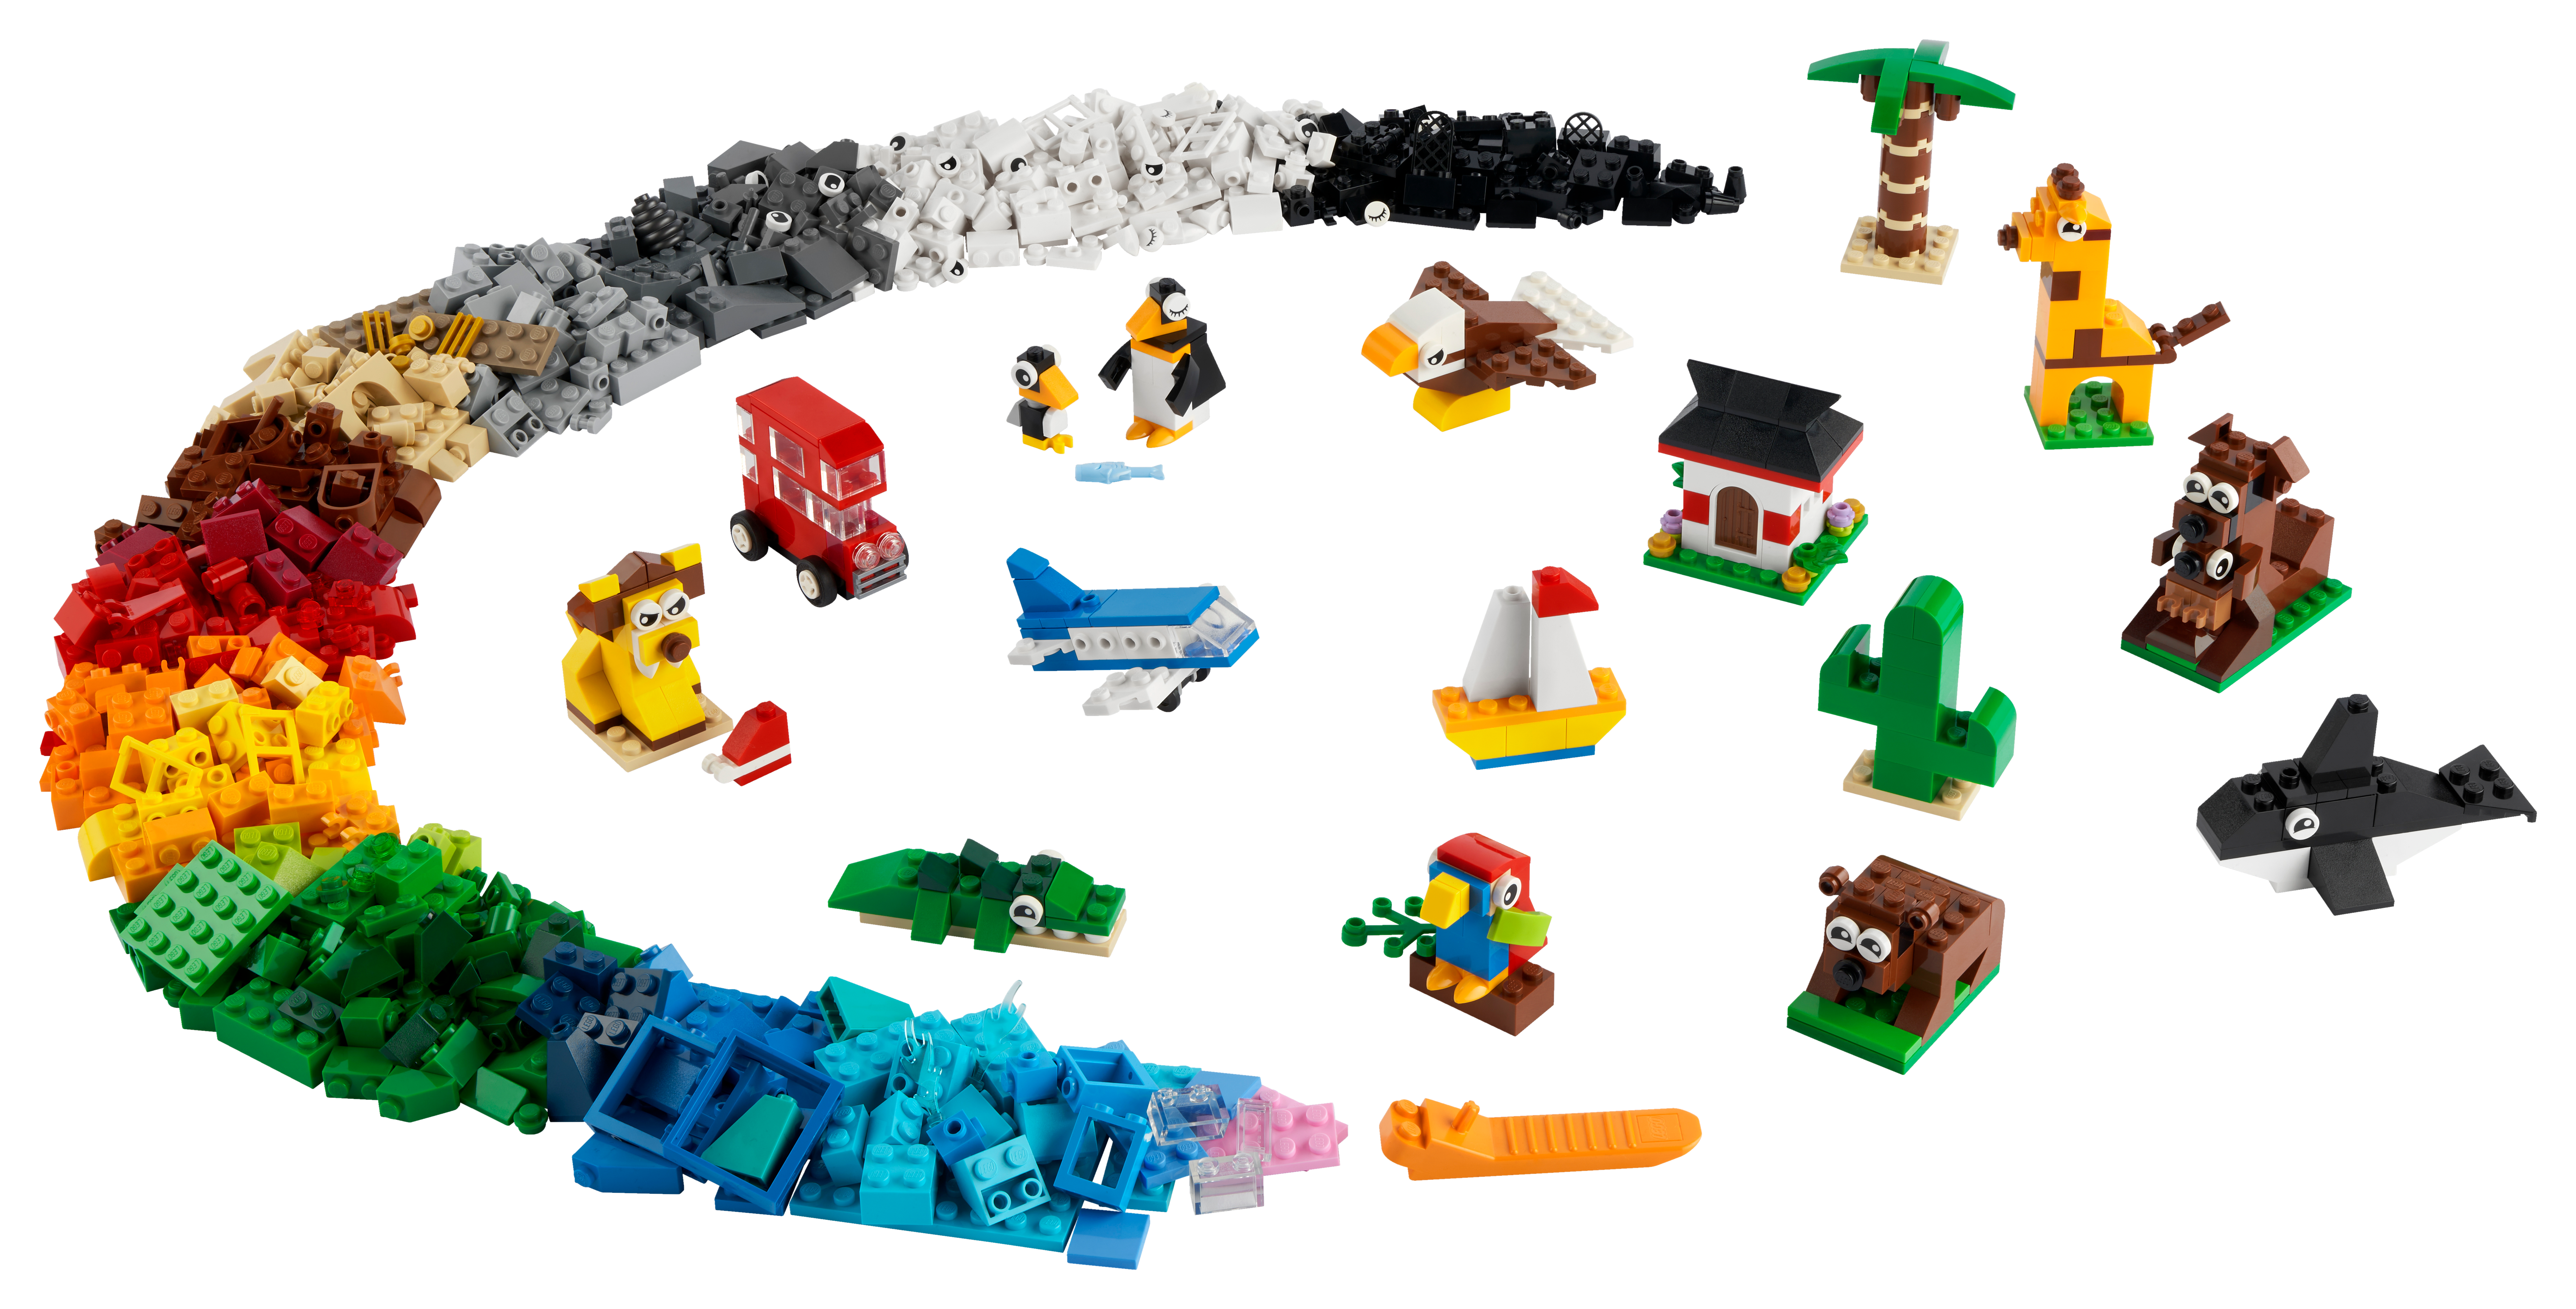 Around the World 11015 | Classic | Buy online at the Official LEGO